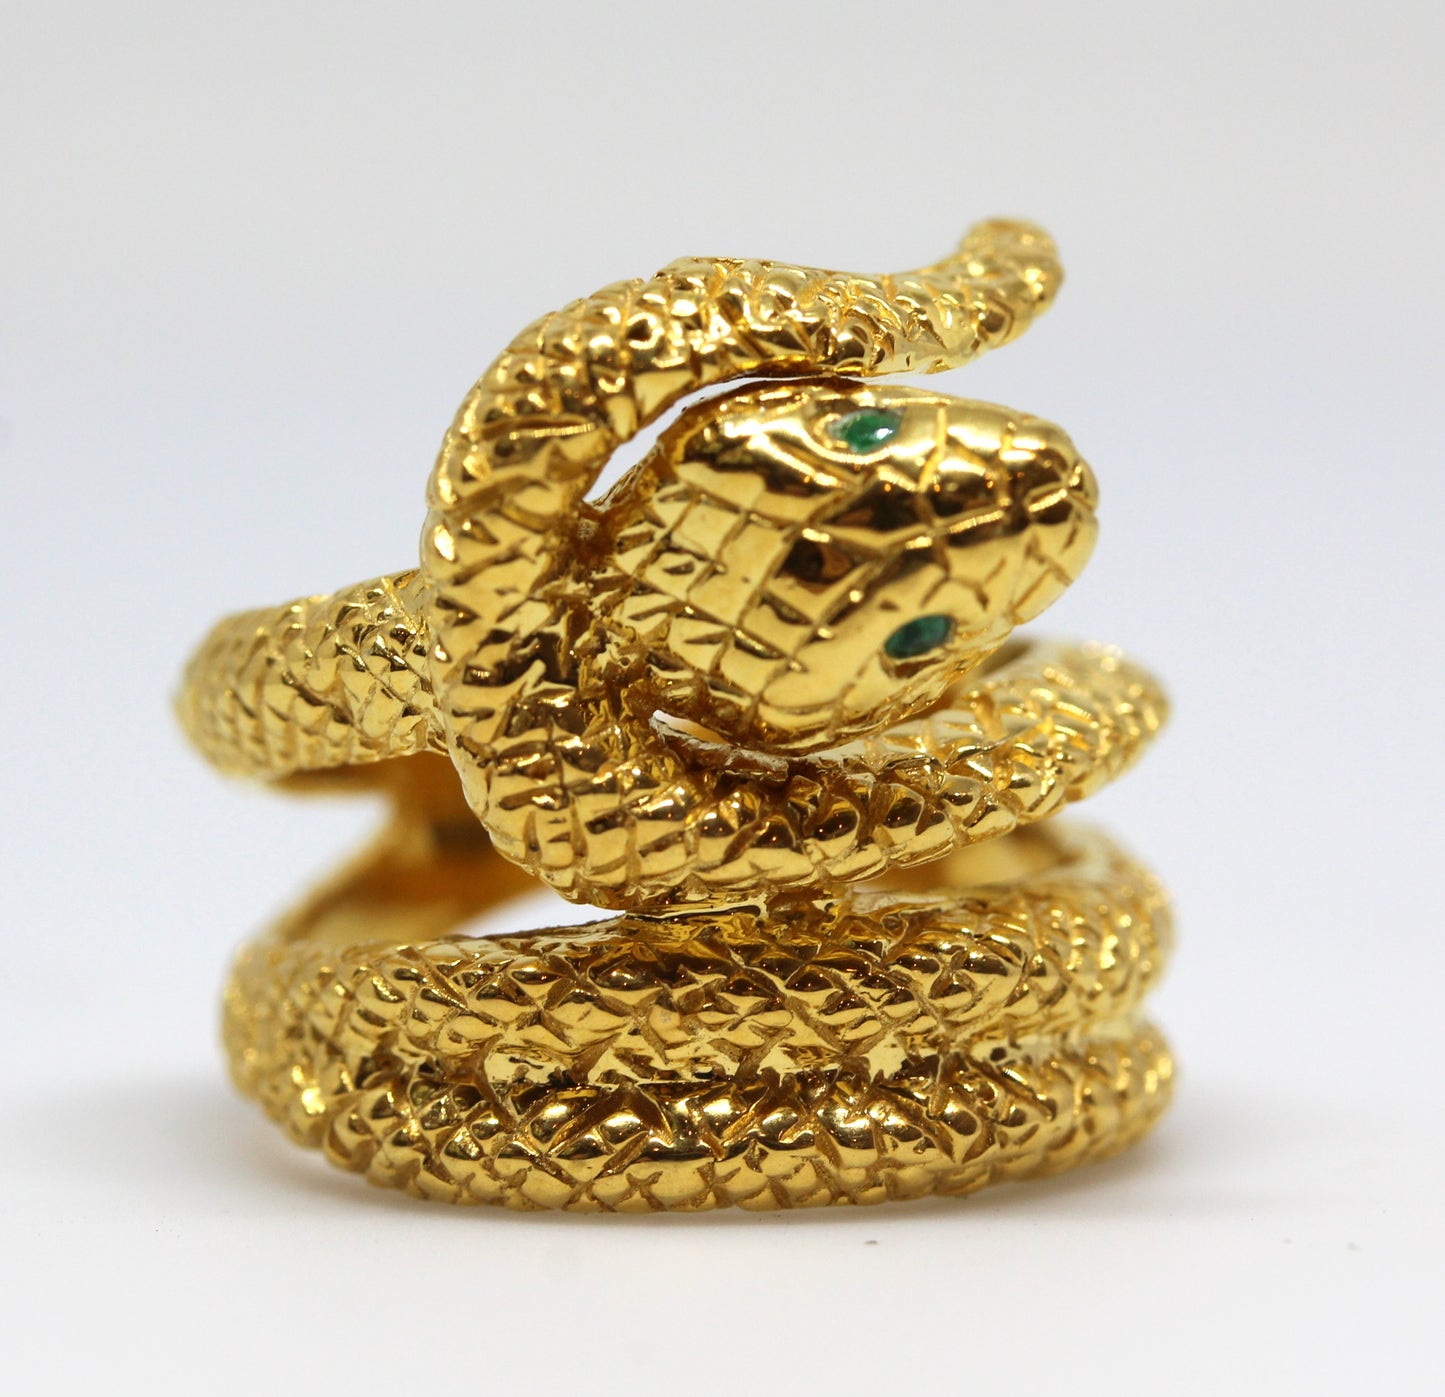 Snake Ring with Emerald Eyes 24k Yellow Gold Vermeil #327